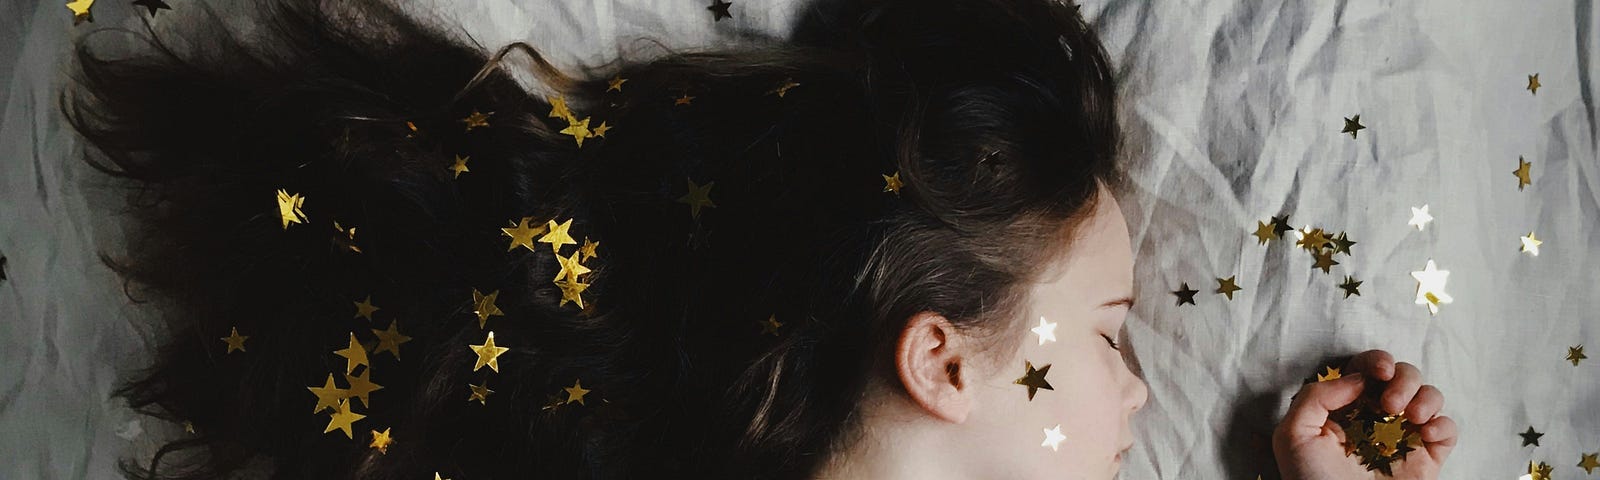 Brown-haired girl sleeping on a bed covered in stars.